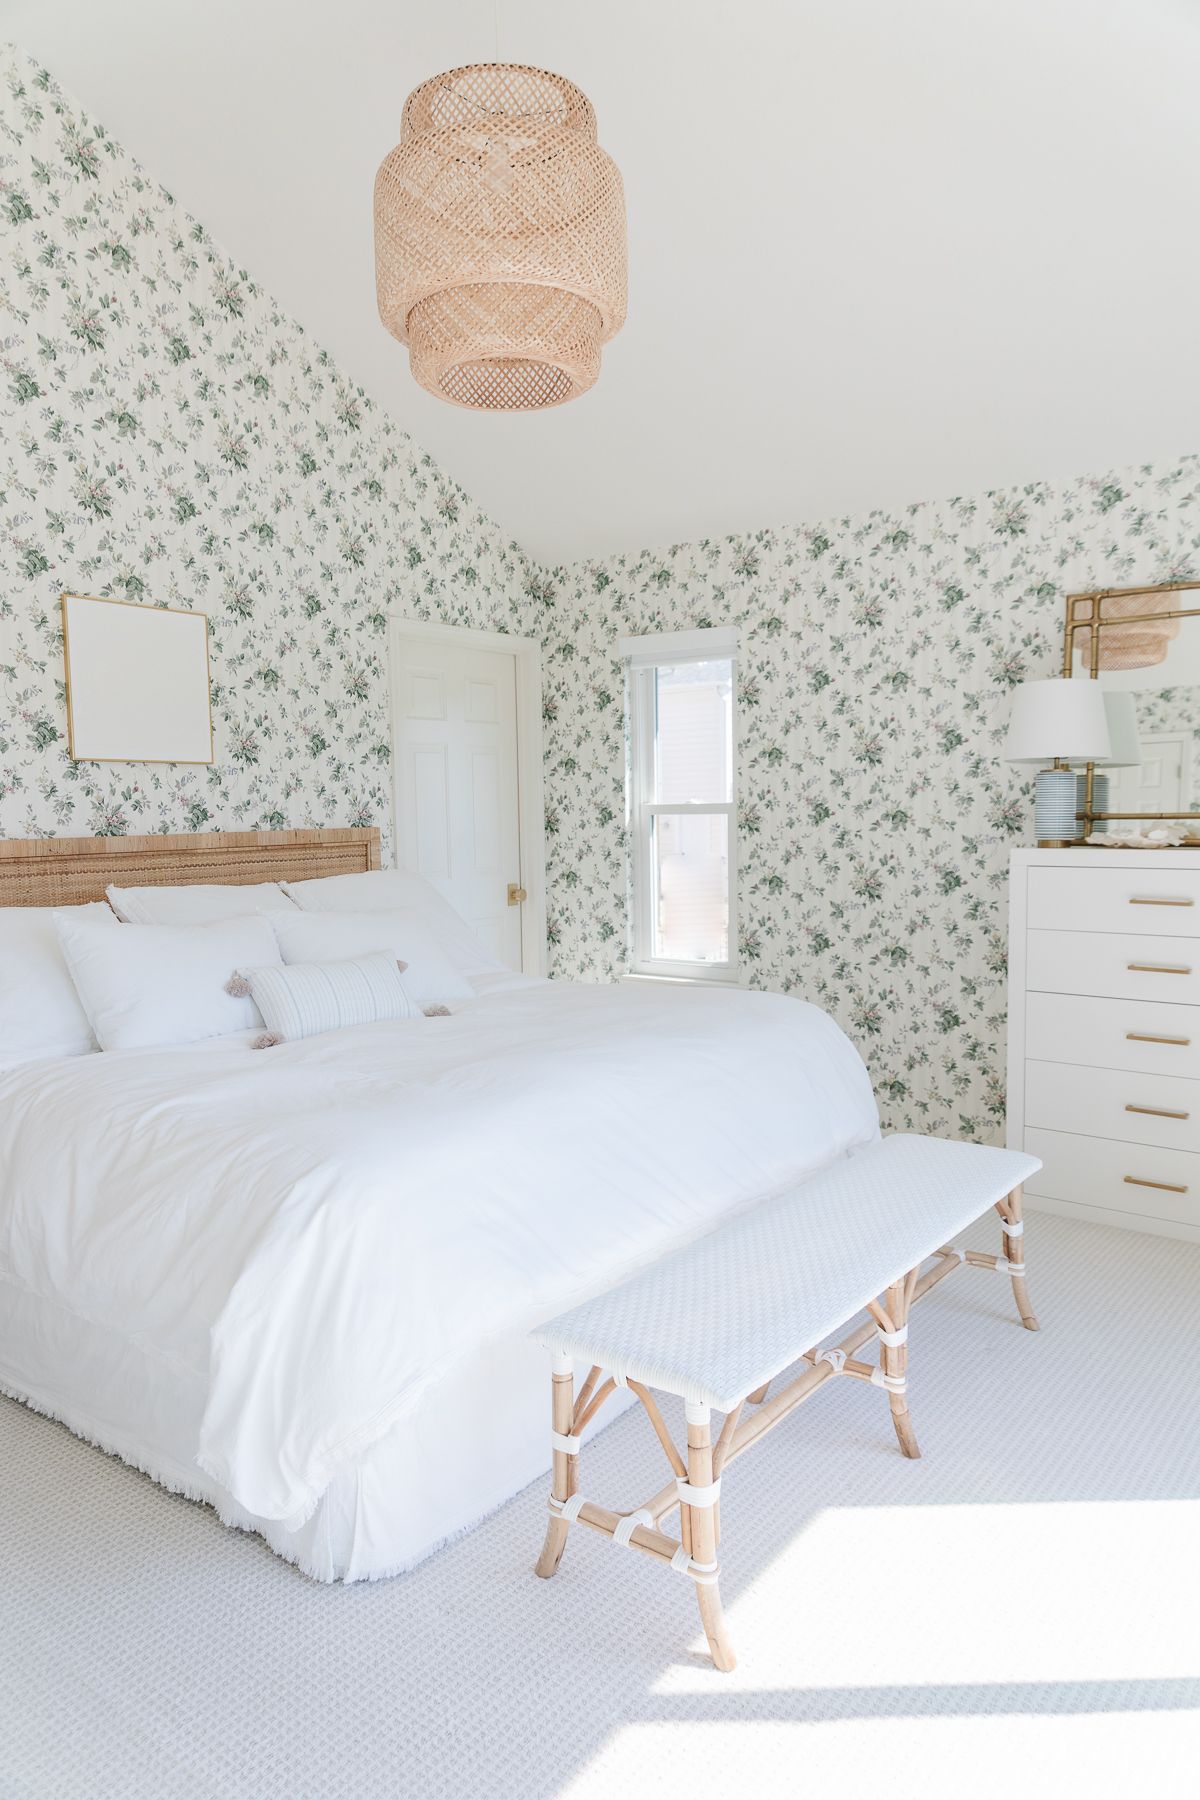 A coastal bedroom with floral wallpaper, and a rattan headboard, bench and light fixture